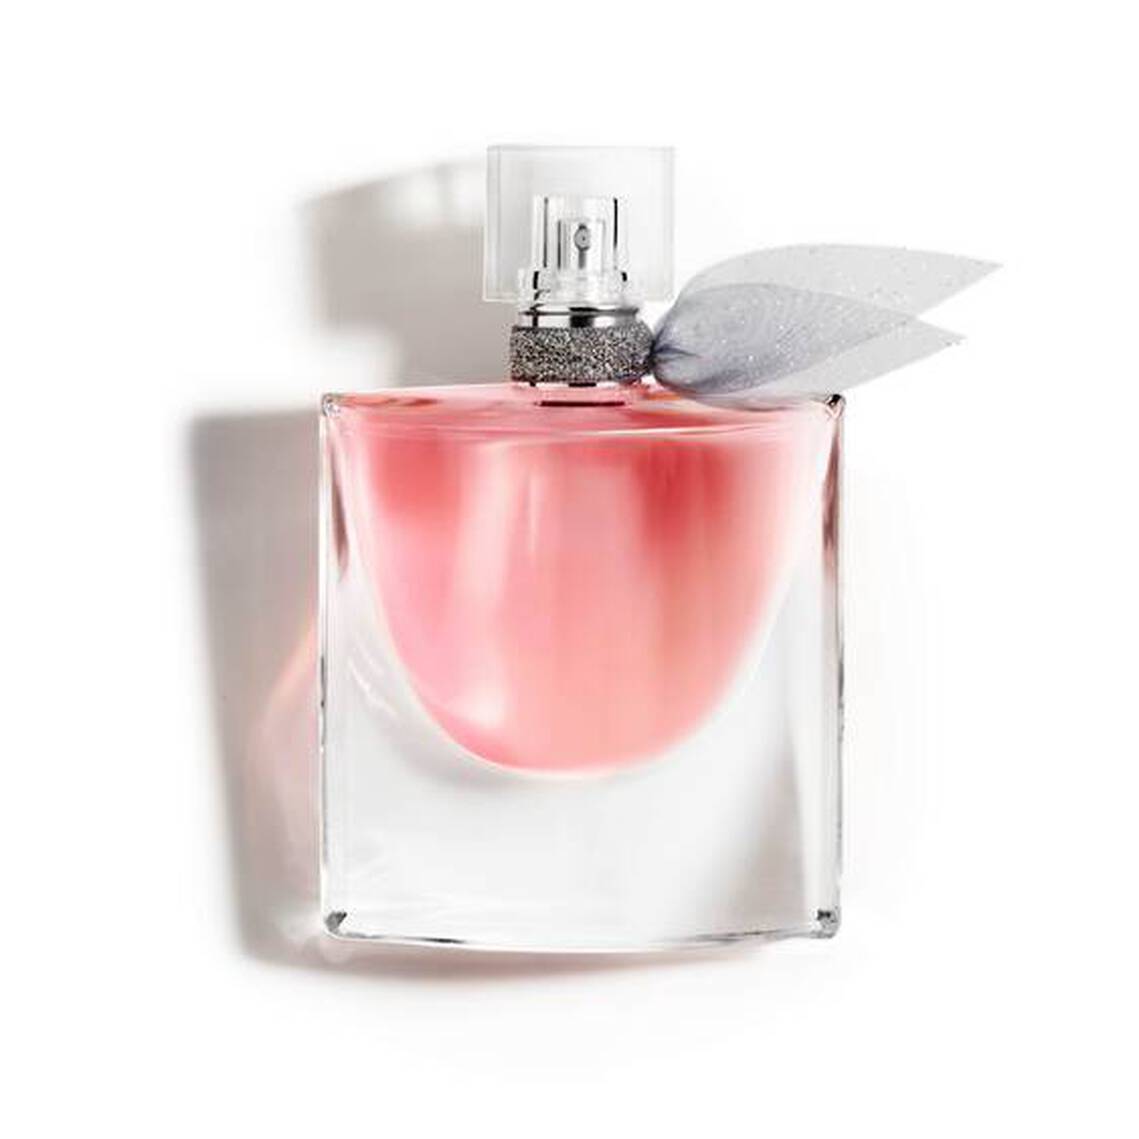 Lancôme India - Buy Luxury Perfume, Makeup & Skin Care Products Online